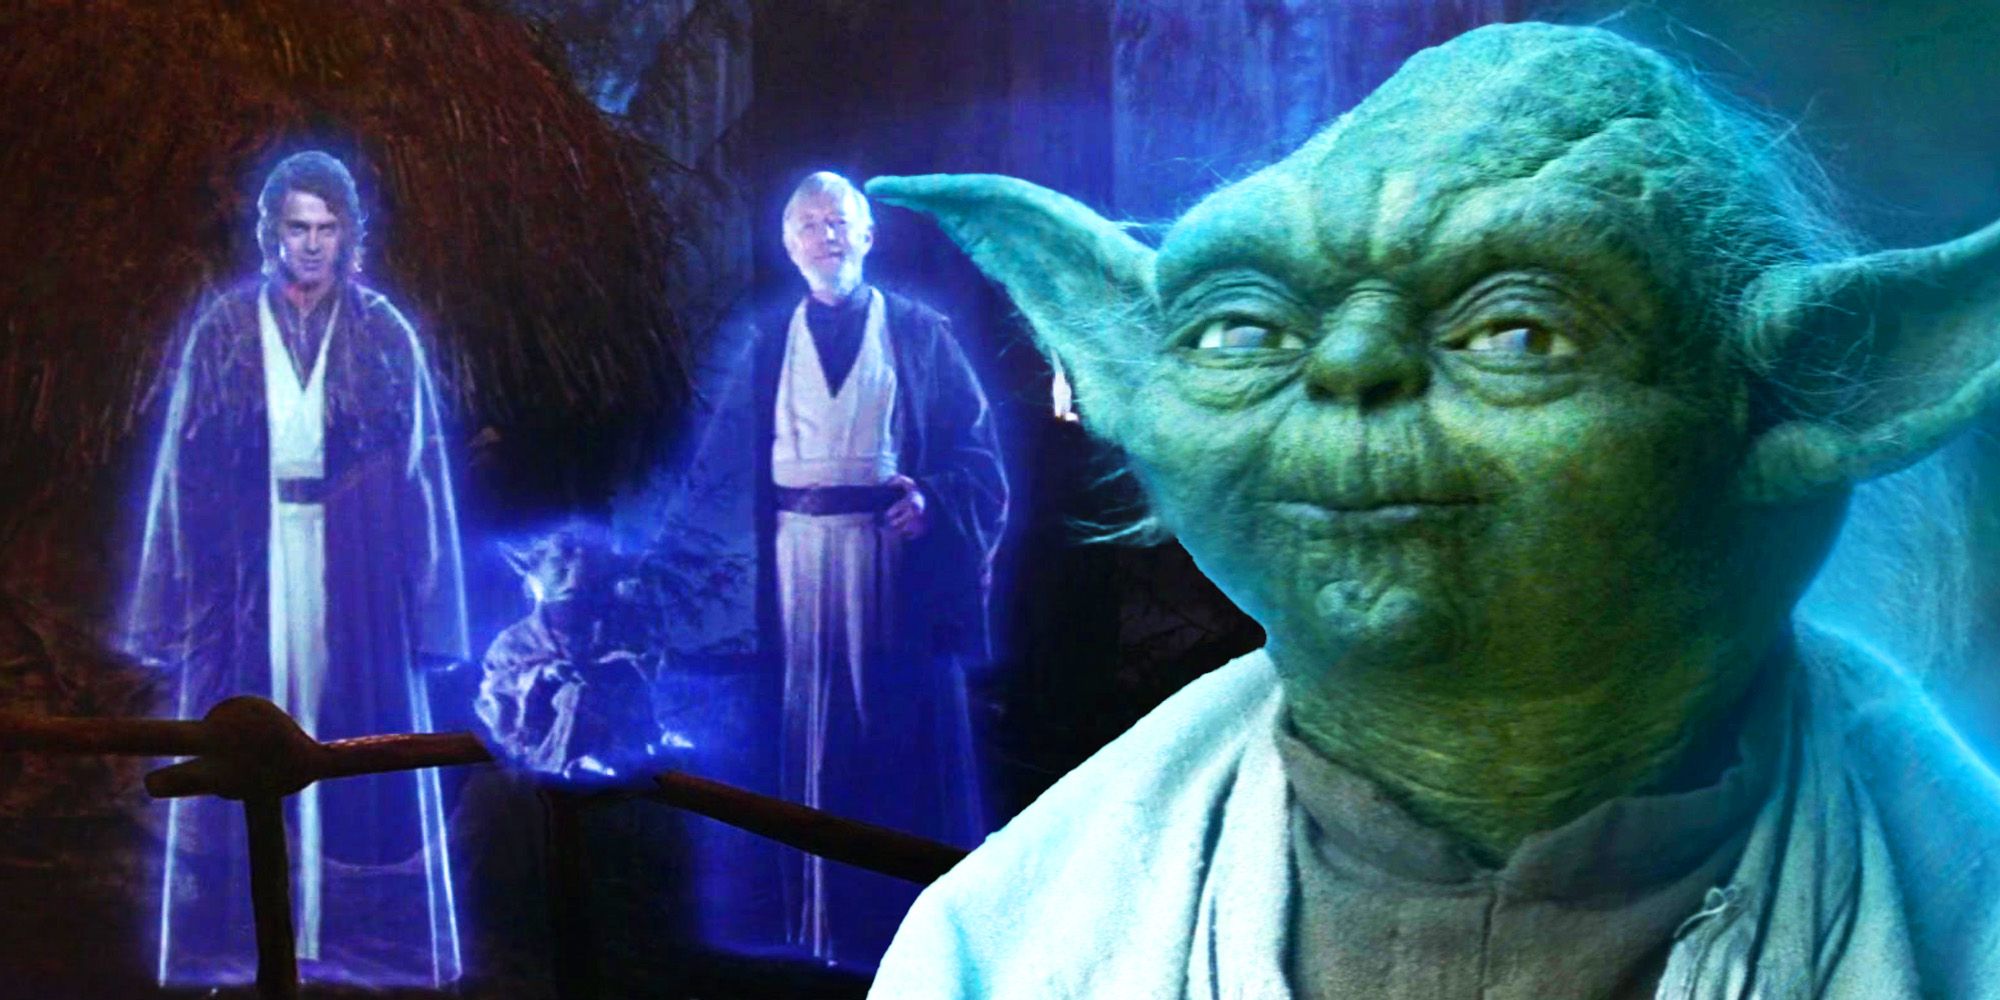 The Last Jedi's Yoda Scene Abandoned One Of George Lucas' Force Ghost Ideas  - & Created Major Star Wars Plot Holes